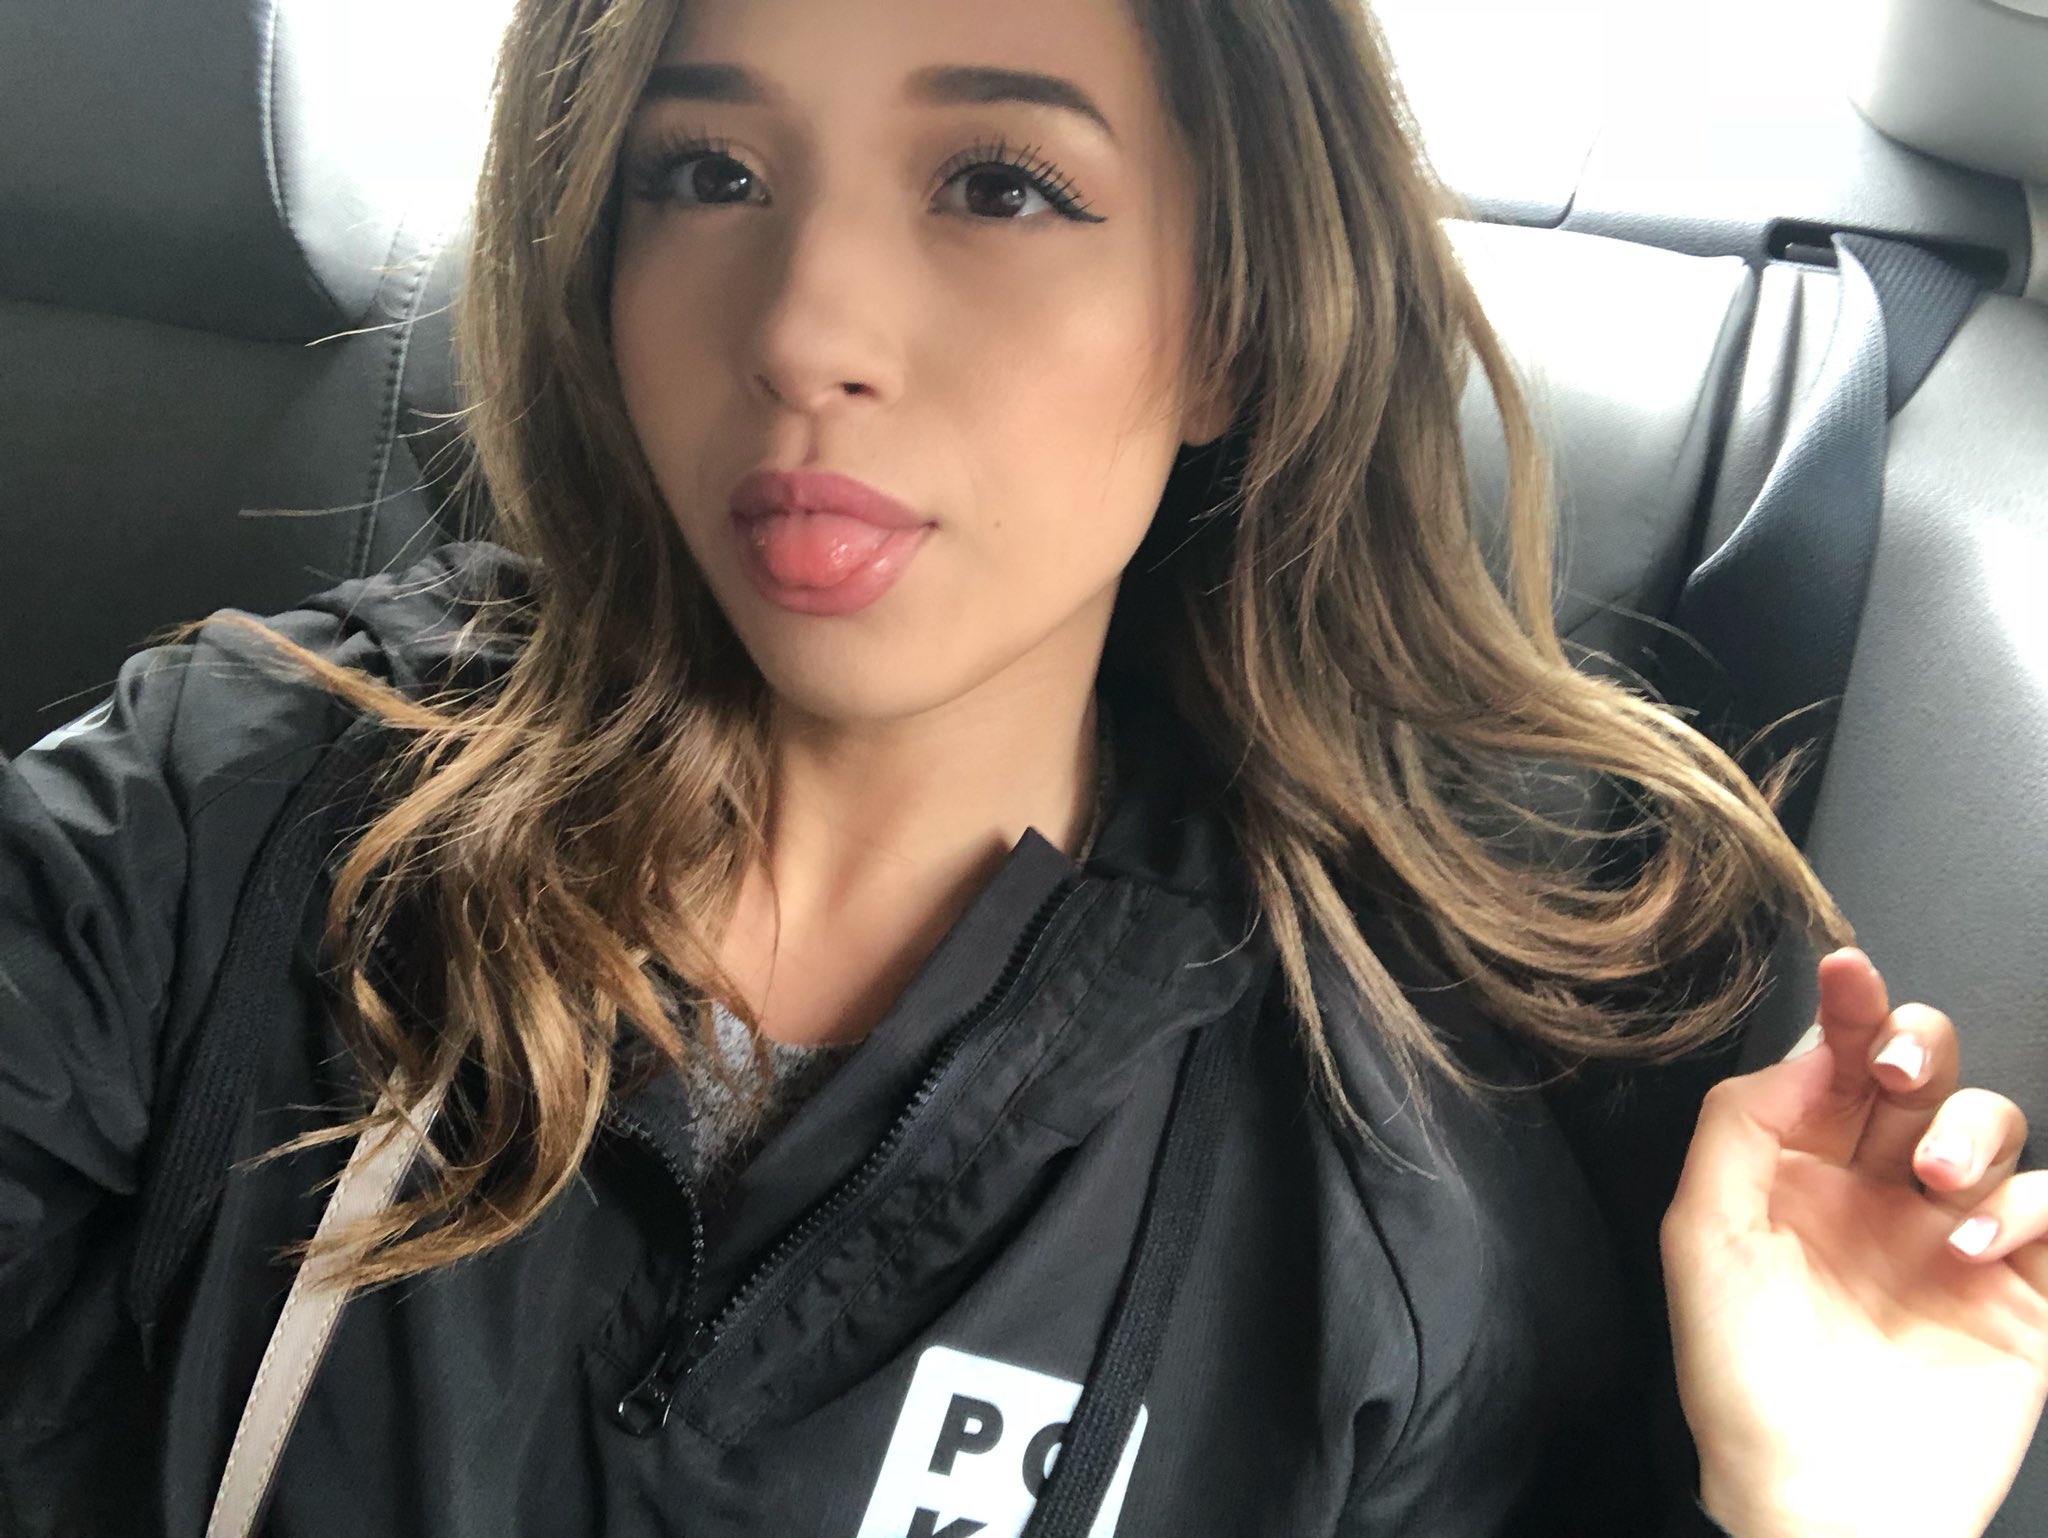 pokimane on Twitter "my last day at Pax ☺ I'll be in.